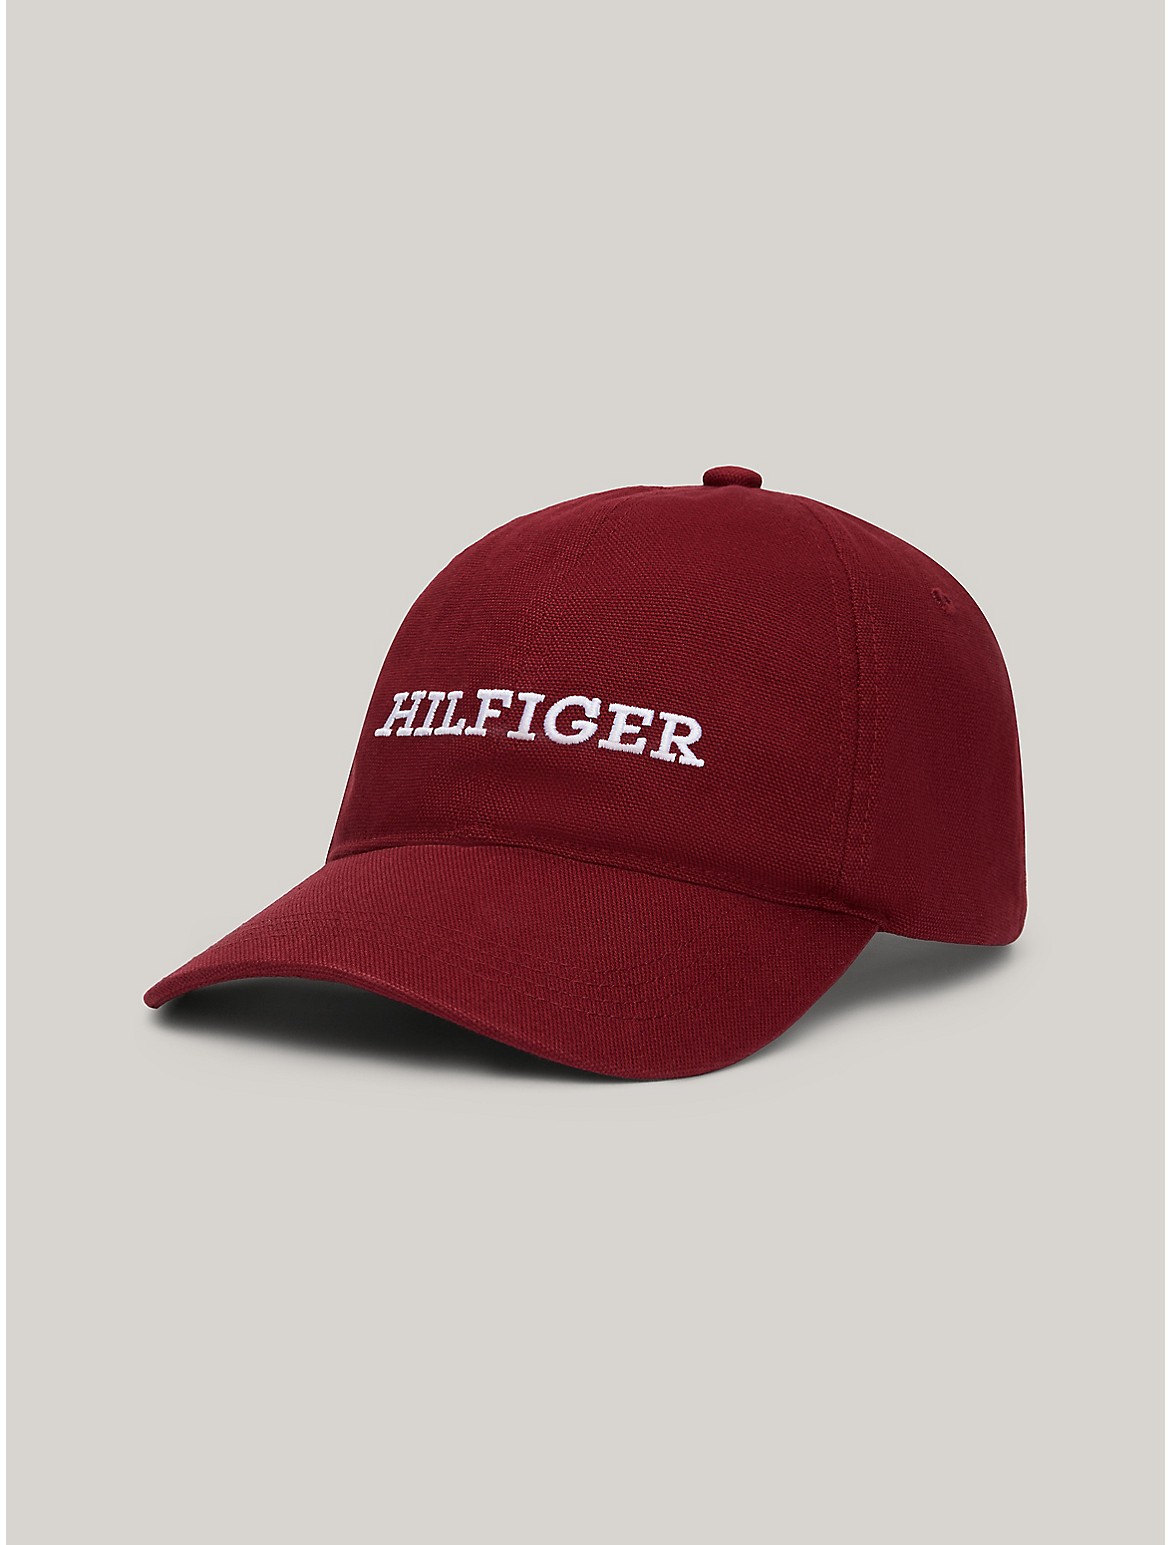 Tommy Hilfiger Men's Embroidered Monotype Cap